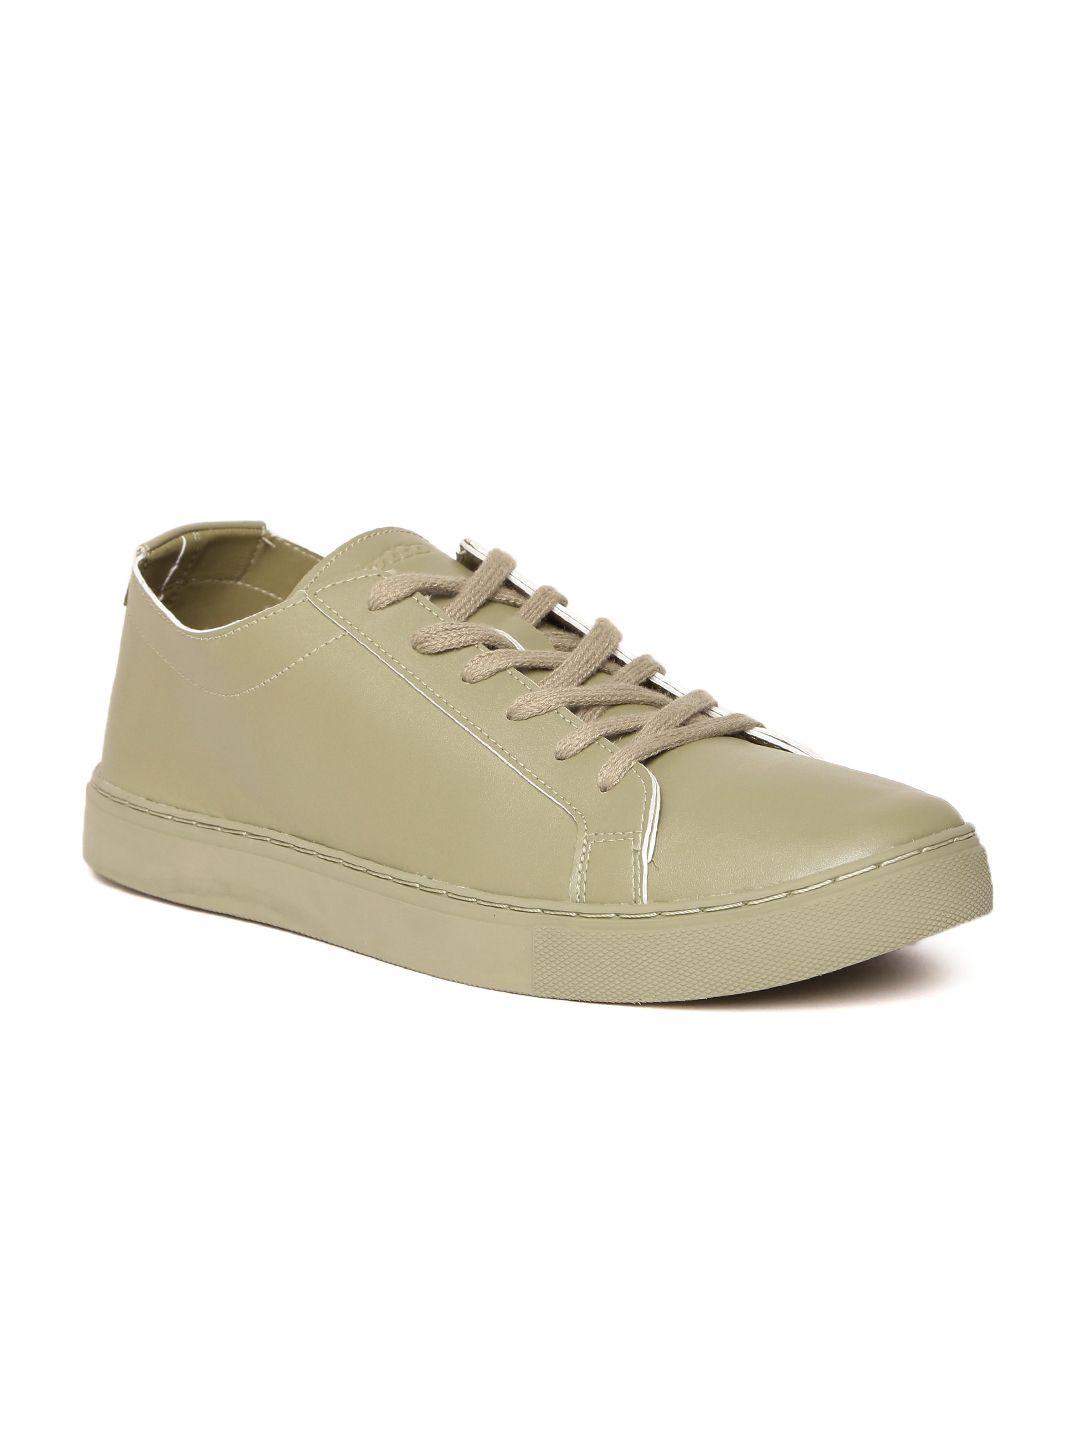 lotto-men-olive-green-sneakers